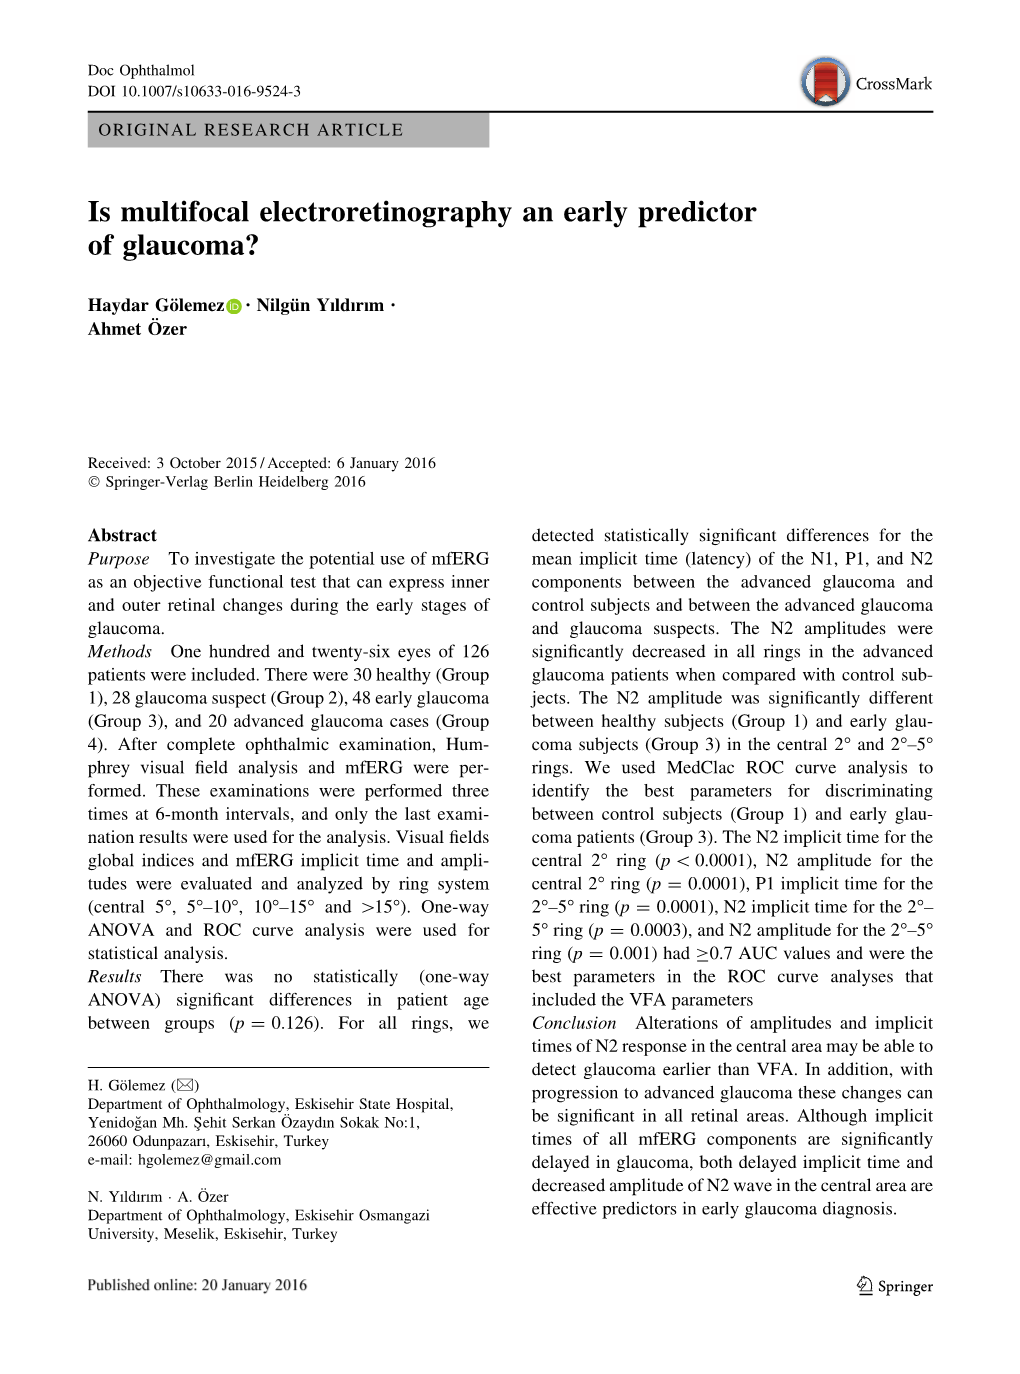 Is Multifocal Electroretinography an Early Predictor of Glaucoma?